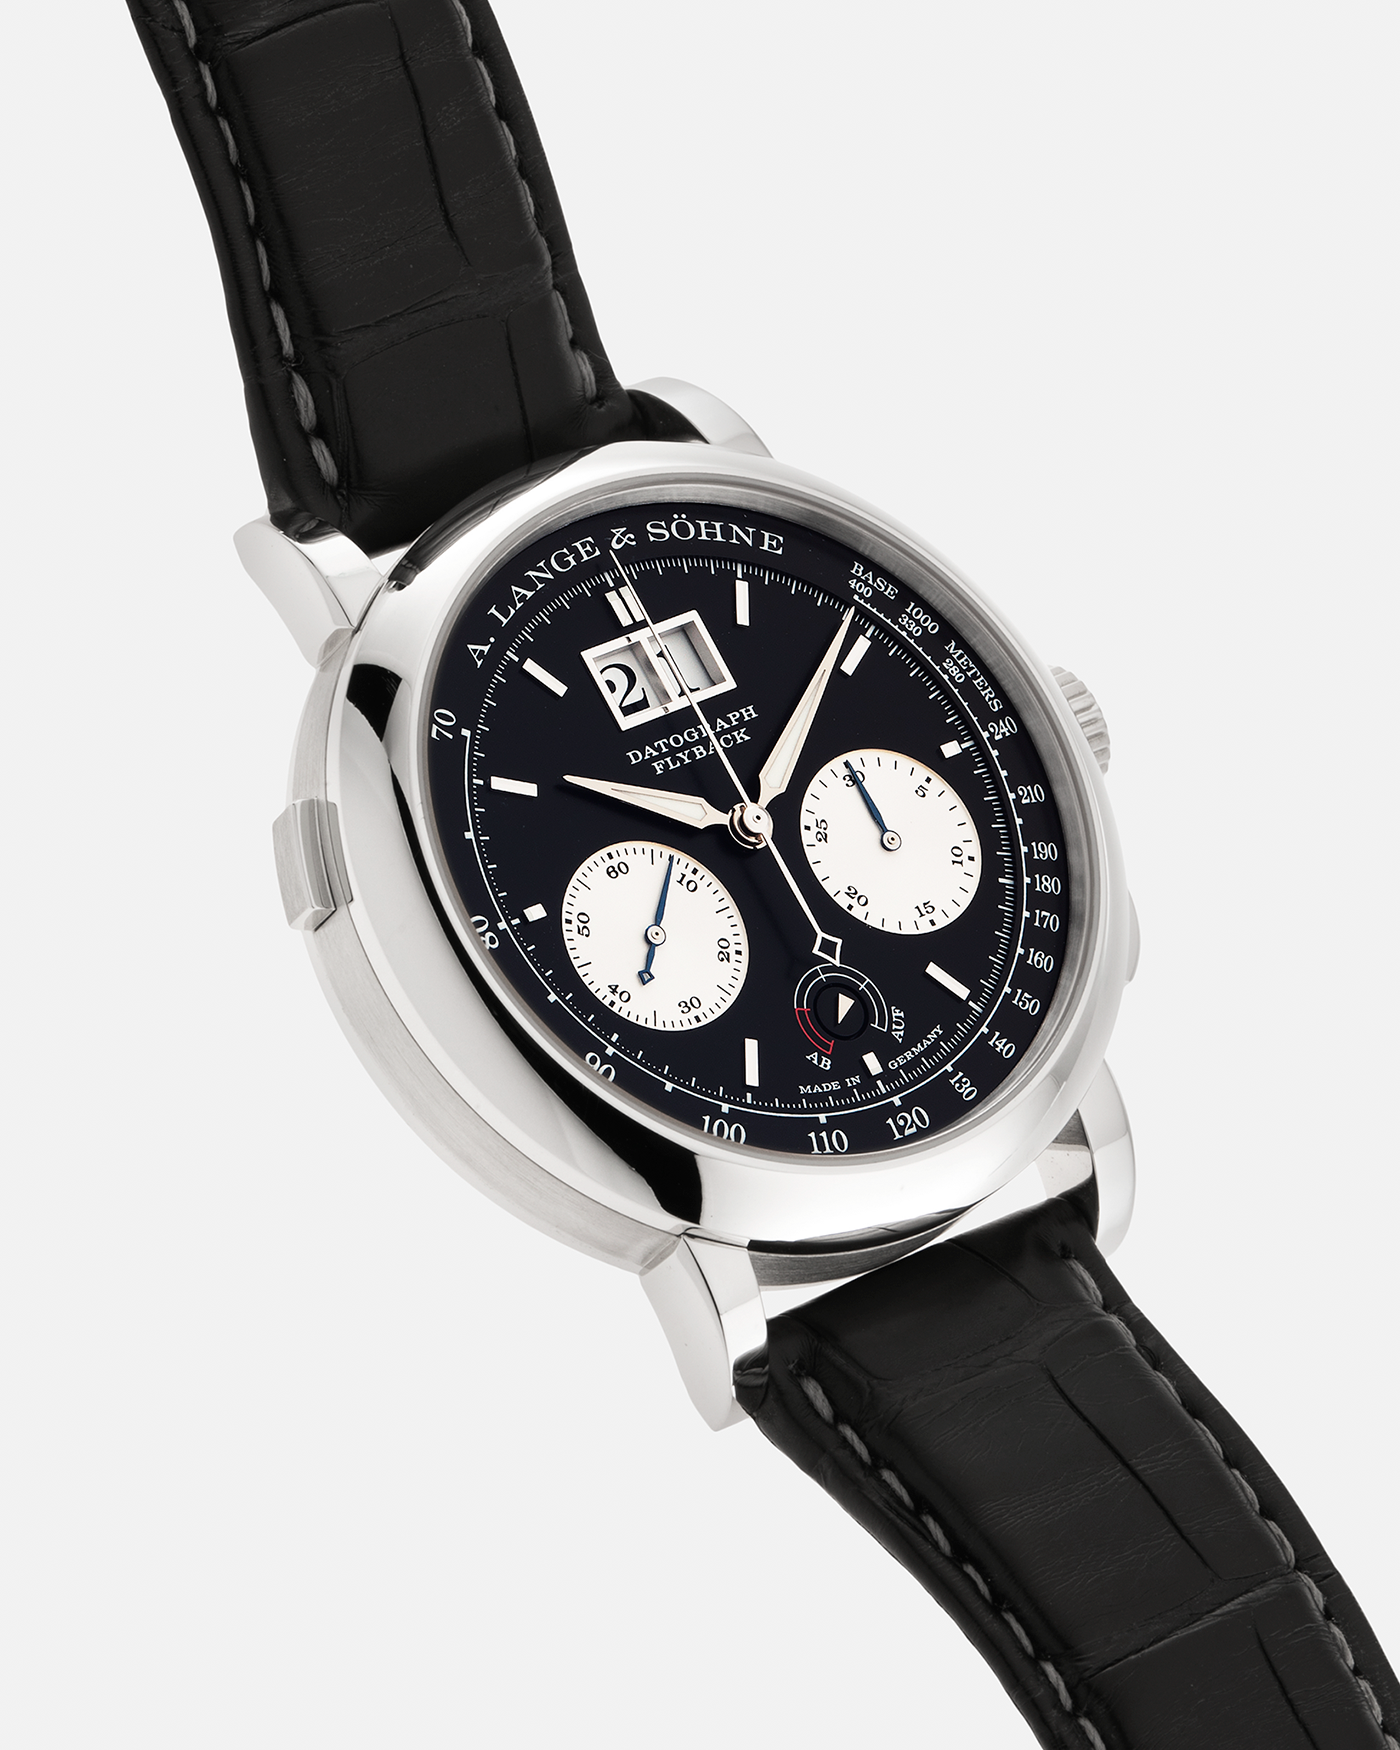 Brand: A. Lange & Söhne Year: 2020 Model: Datograph Up/Down Reference Number: 405.035 Material: Platinum 950 Movement: A. Lange & Söhne Cal. L951.6, Manual-Winding Case Dimensions: 41mm x 13.1mm Lug Width: 20mm Strap: A. Lange & Söhne Black Alligator Strap with Signed Platinum 950 Tang Buckle